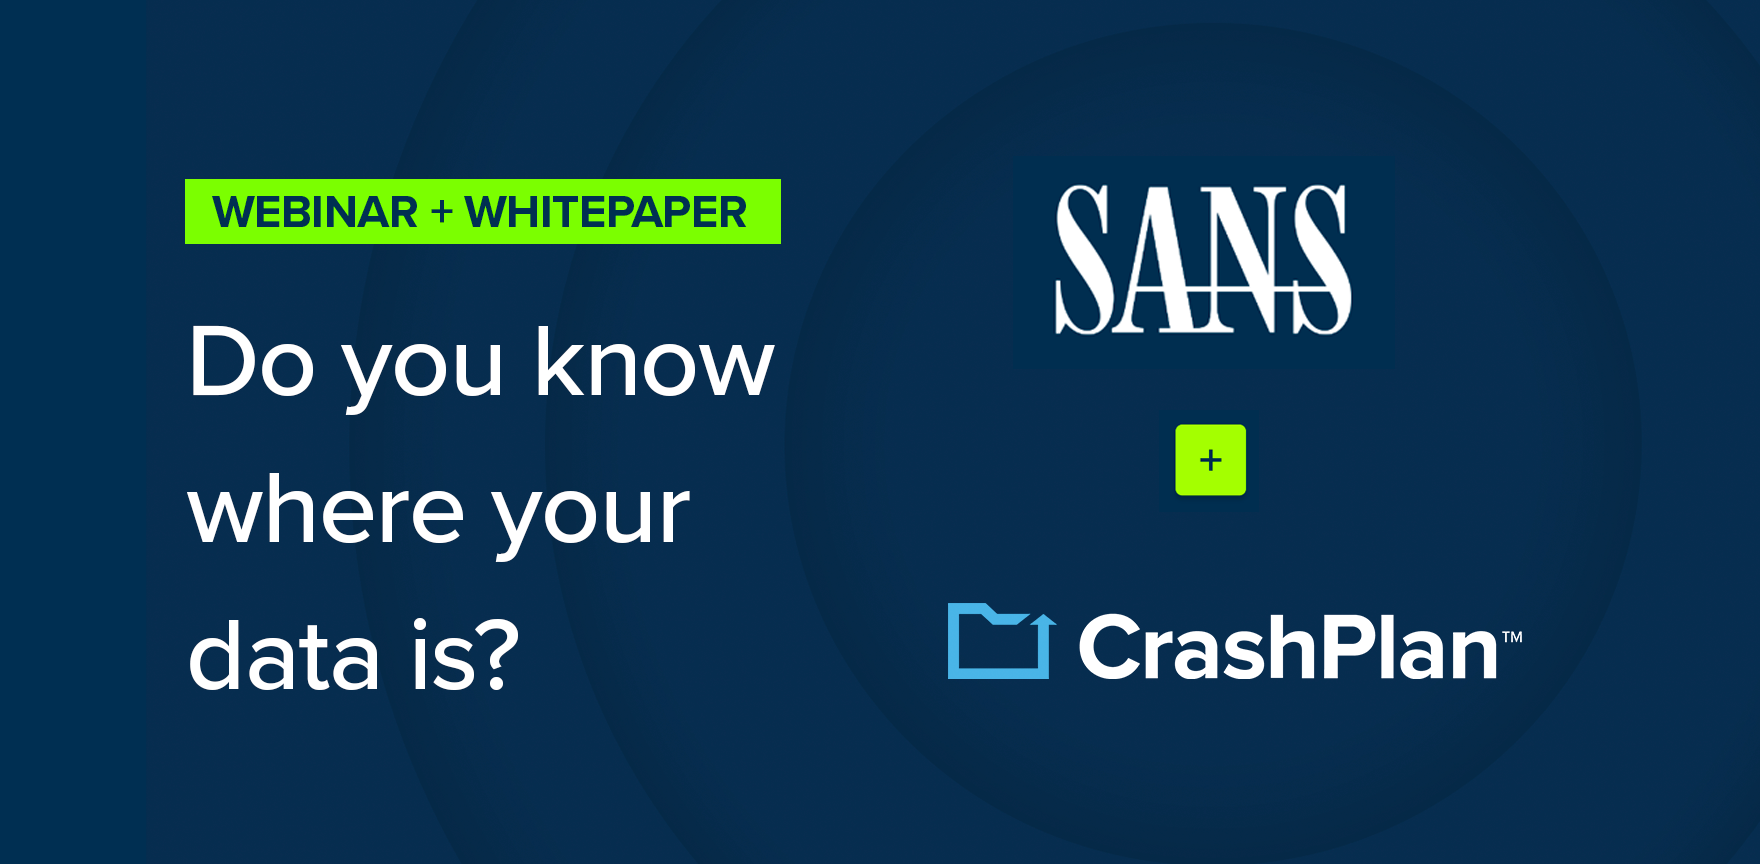 Do you know where your data is? A webinar with SANS and CrashPlan